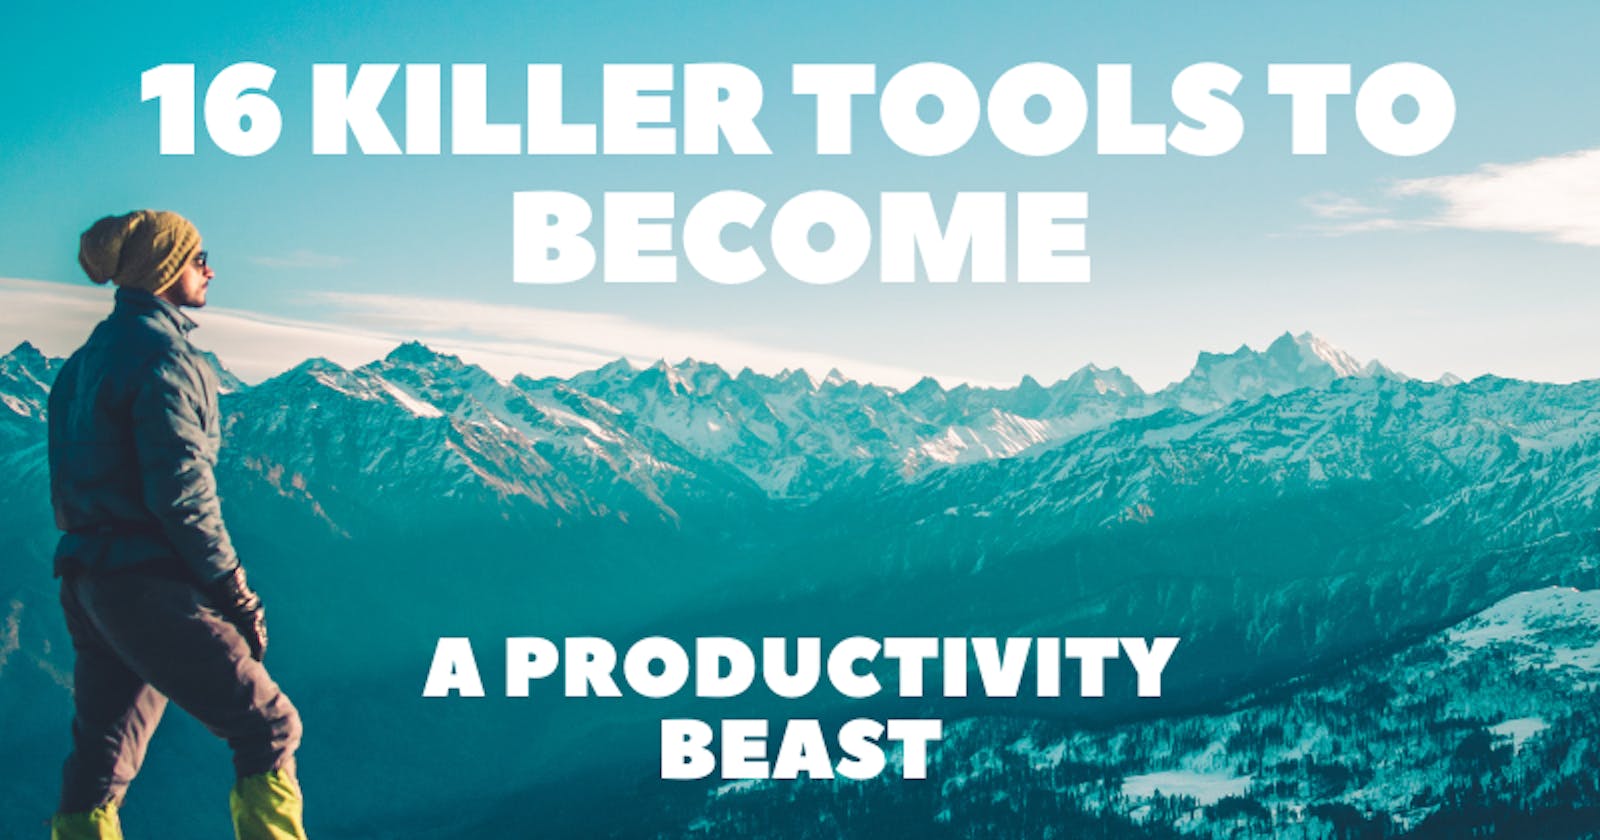 16 Killer Tools to Become a Productivity Beast ⚡🚀